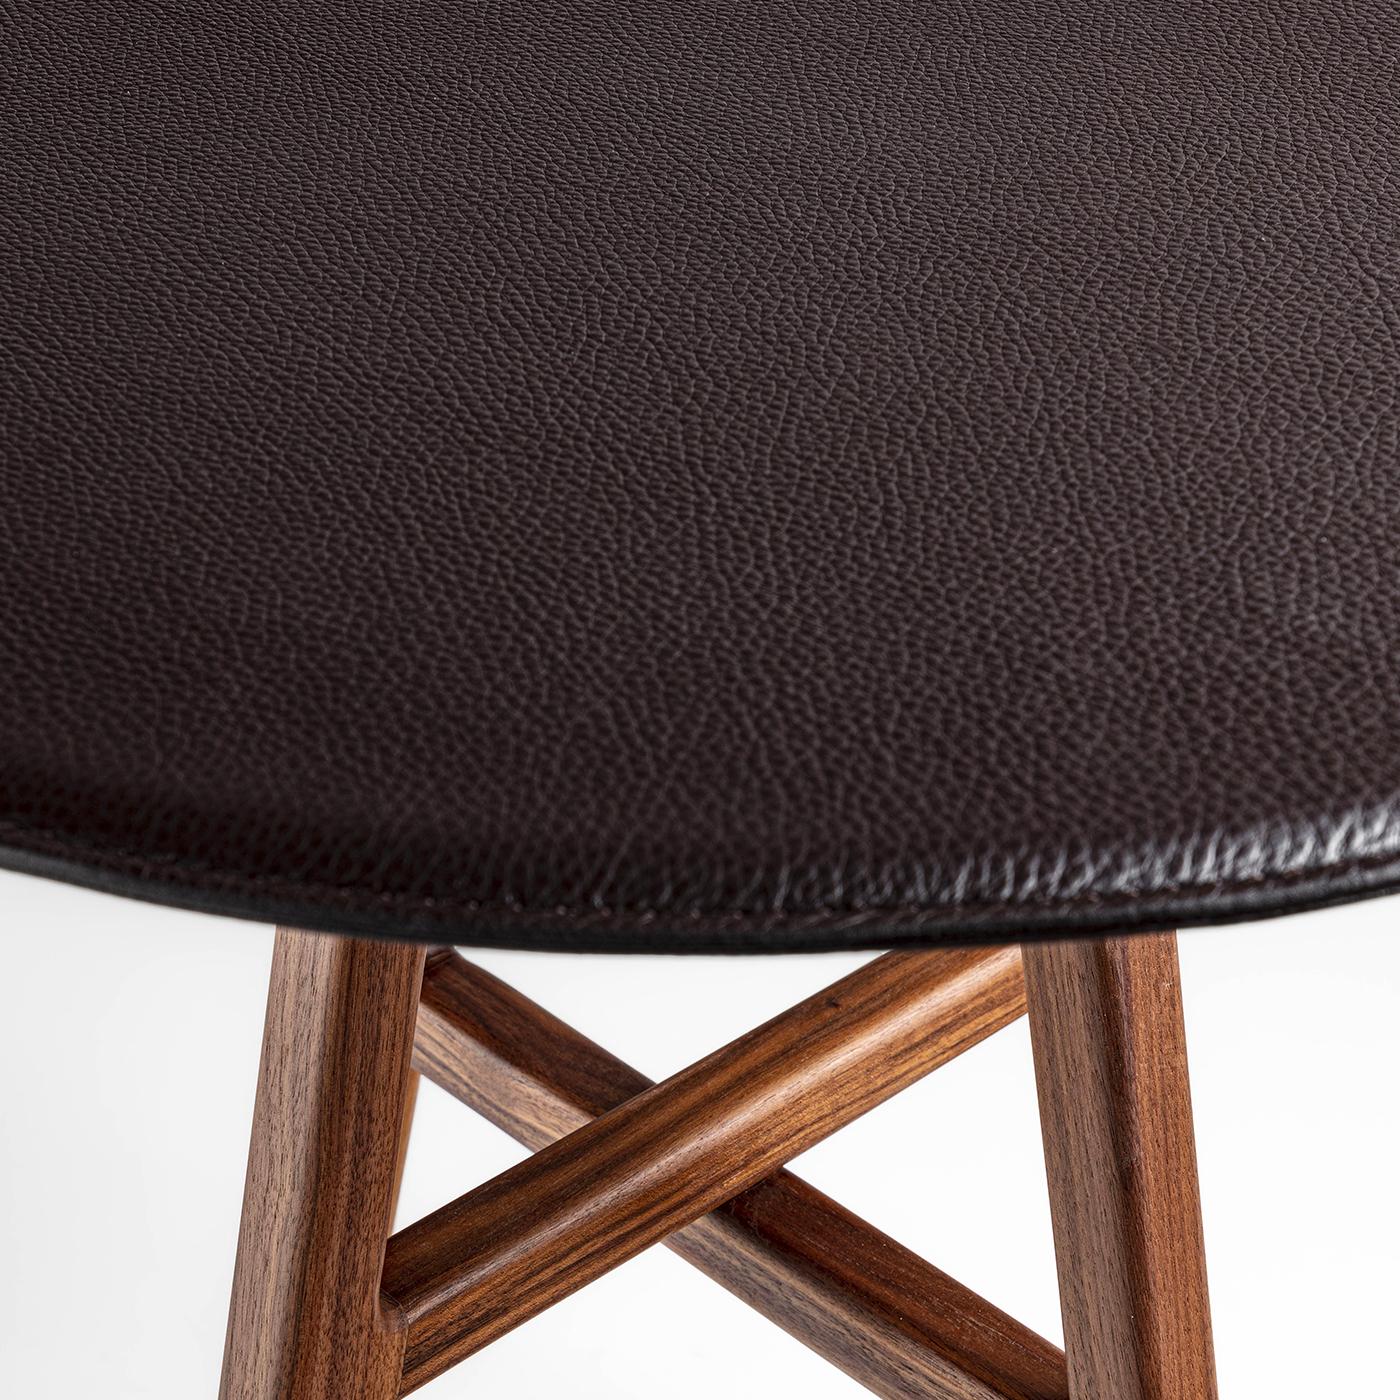 Versatility and slenderness meet in this remarkable accent table, a superb solution to enrich modern homes marked by warm neutrals. The round top covered in genuine brown leather can be lifted and detached to serve as an independent tray, revealing